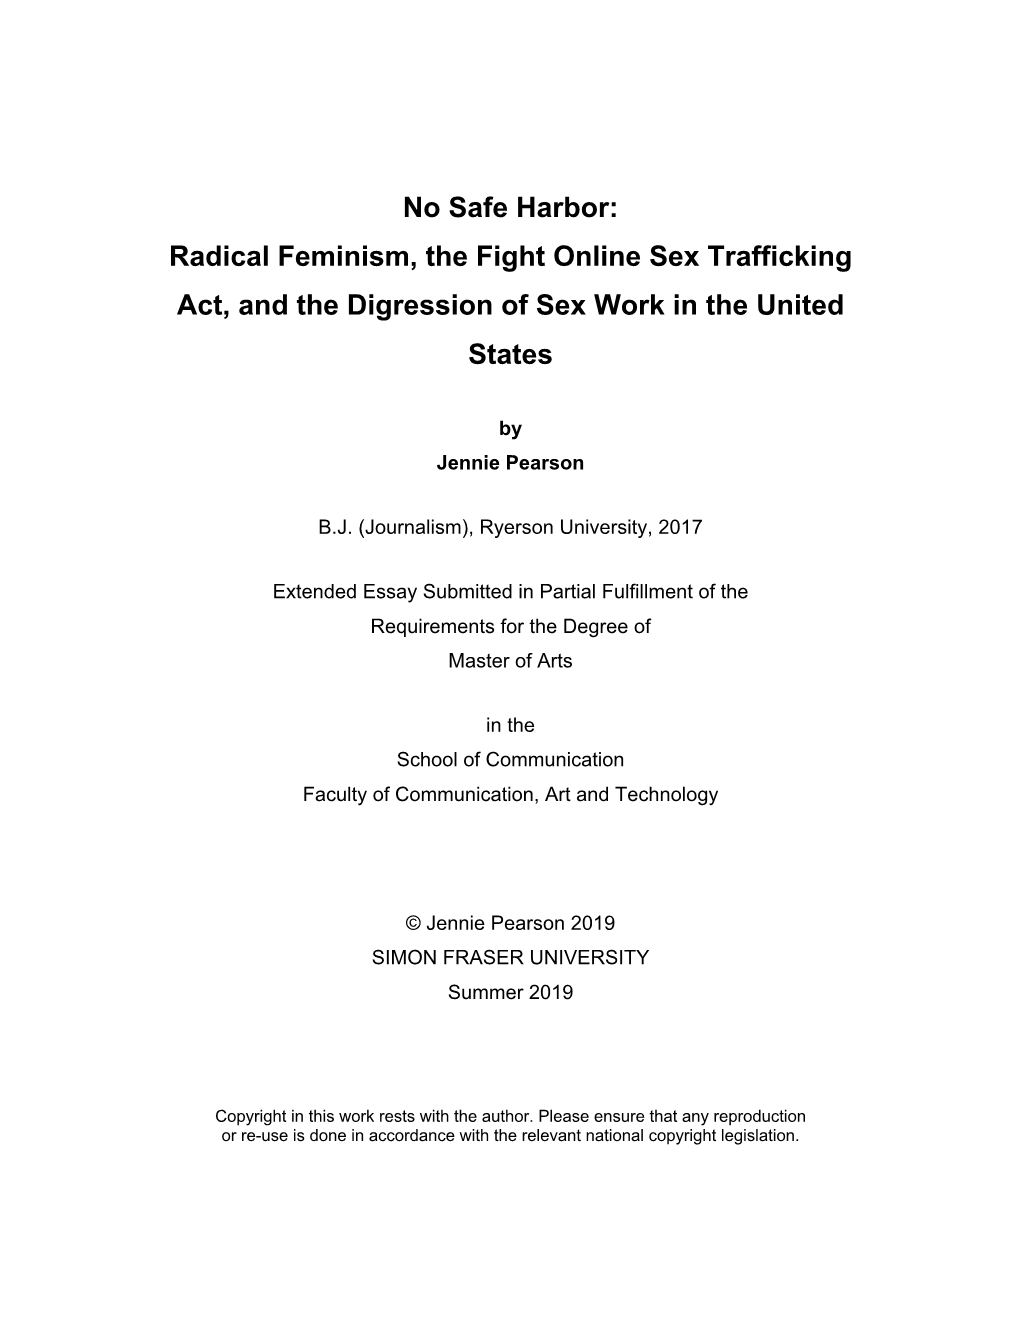 Radical Feminism, the Fight Online Sex Trafficking Act, and the Digression of Sex Work in the United States